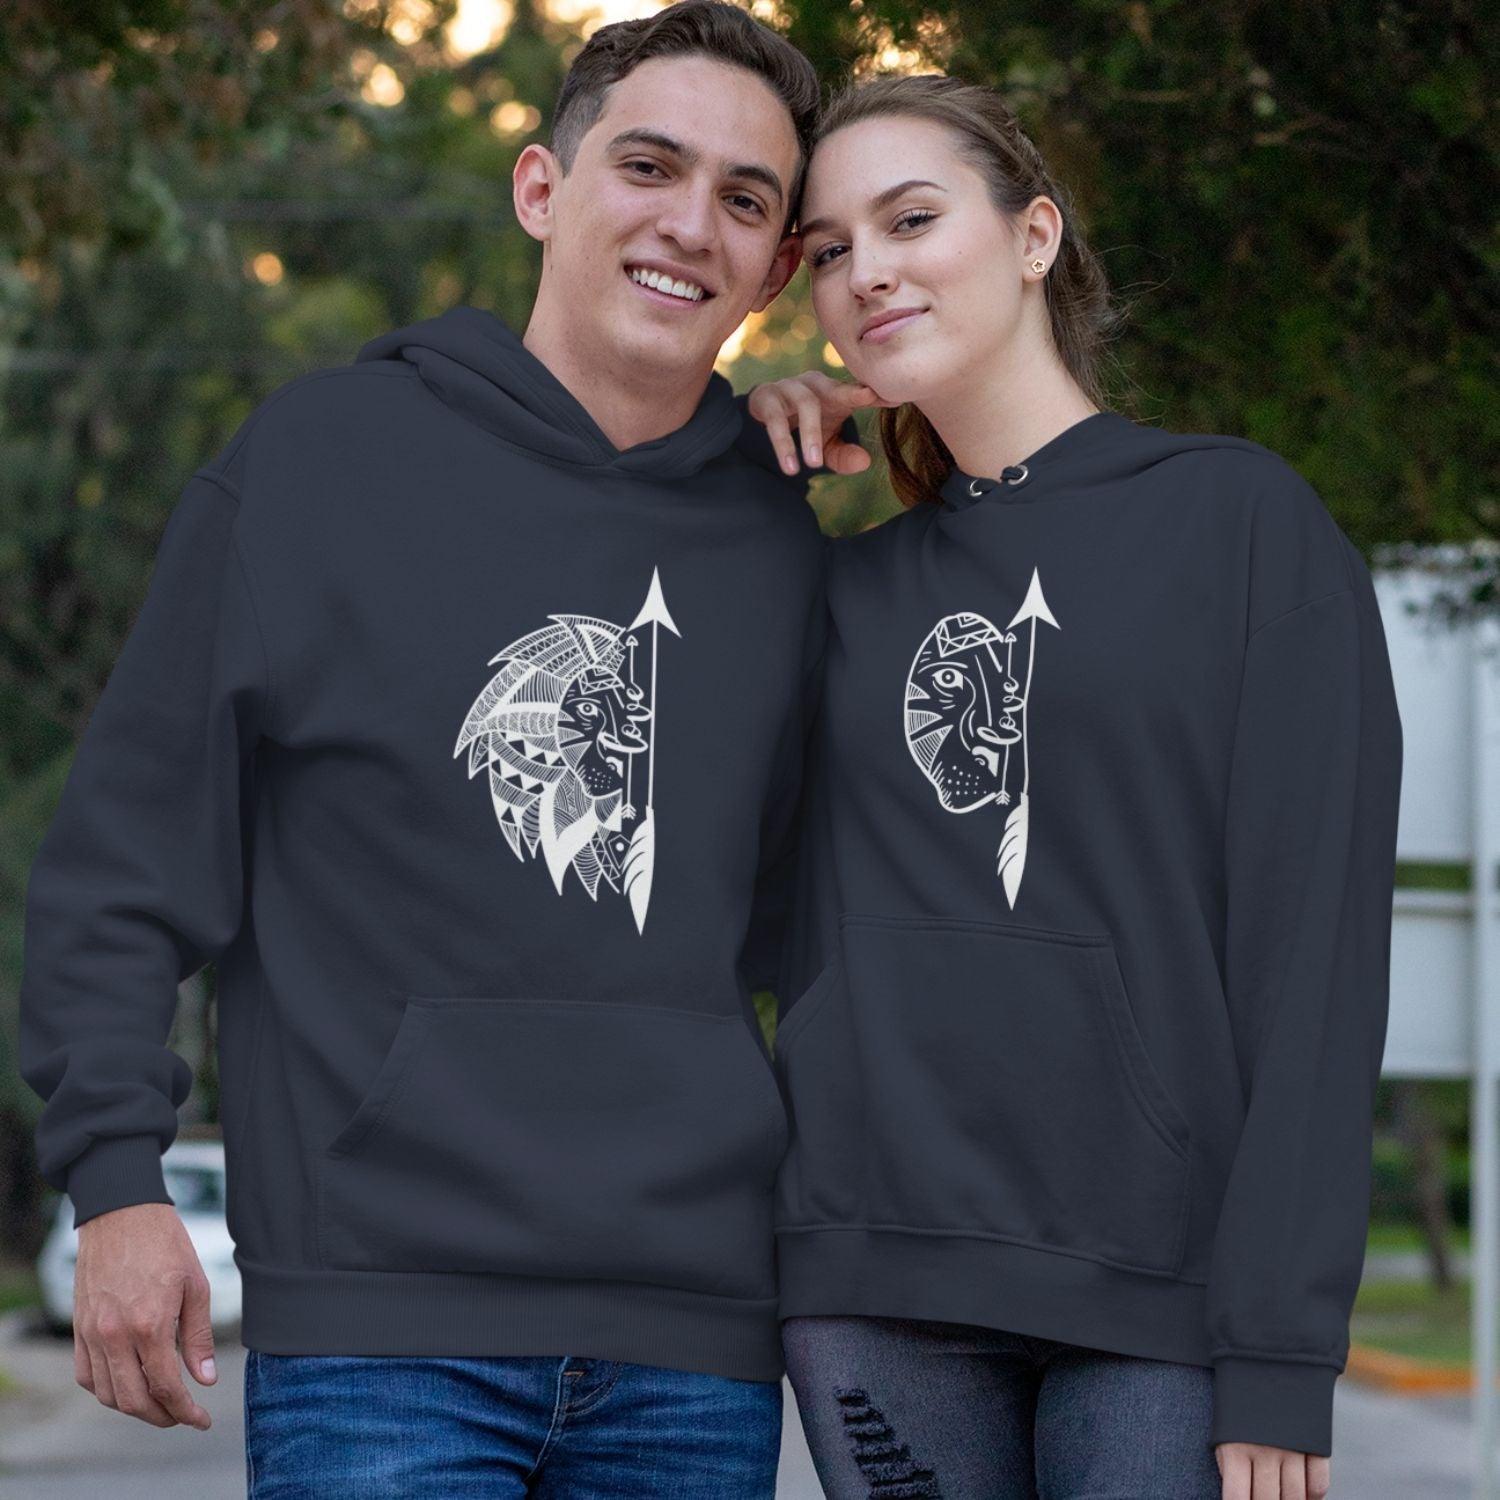 Dynamic Duo Matching Outfits: Stunning Lion & Lioness Set - The Perfect Surprise Gift! - 4Lovebirds